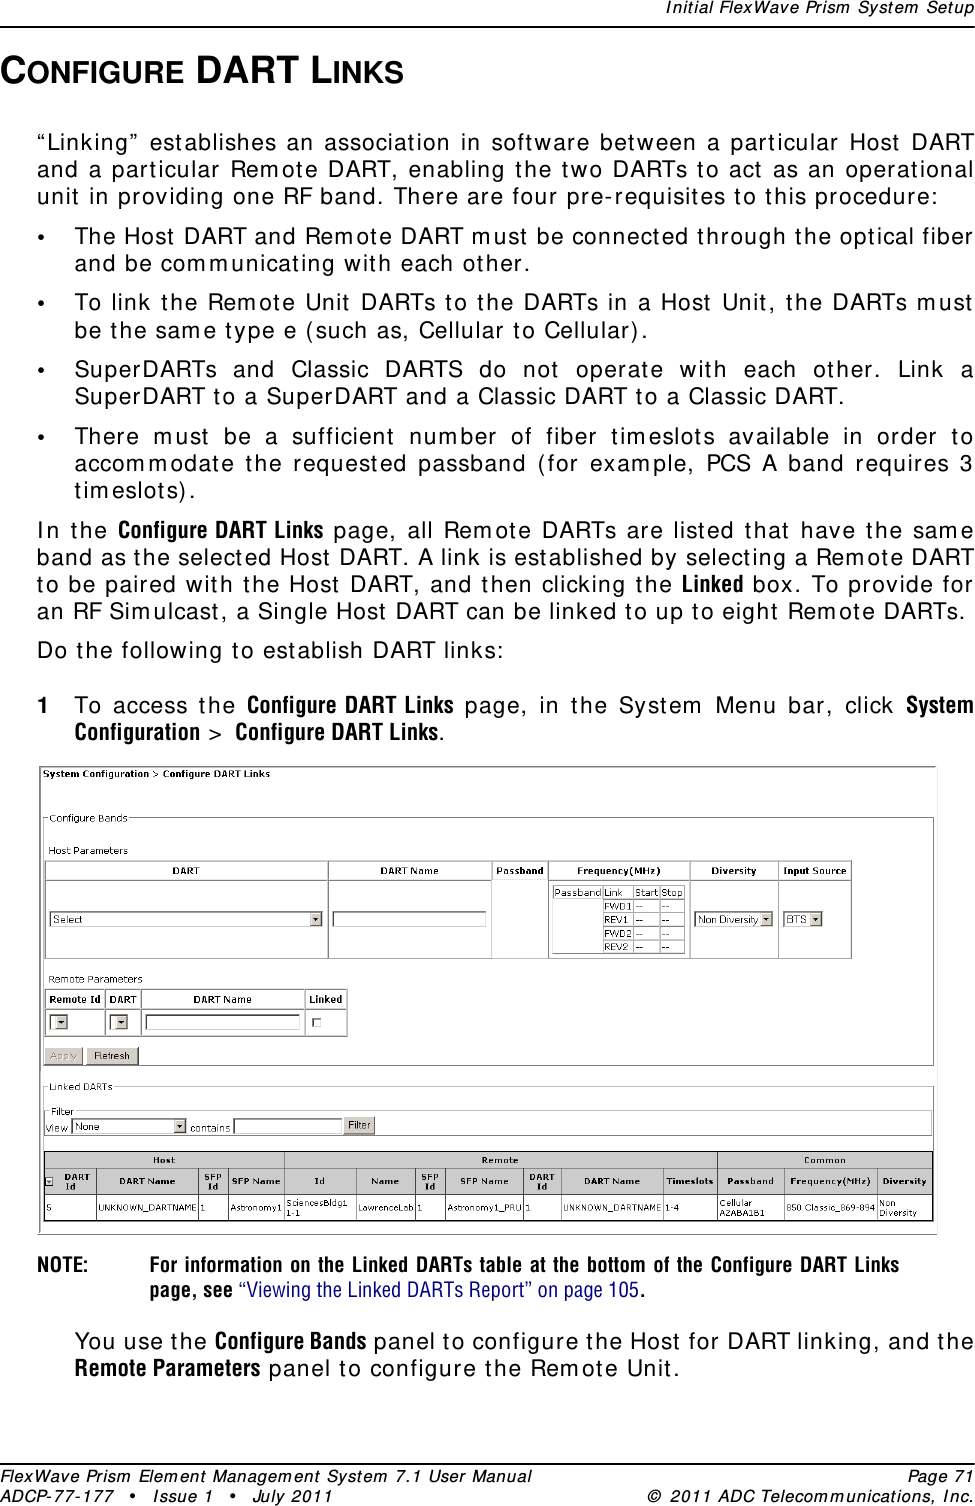 I nit ial FlexWave Prism  System  SetupFlexWave Prism  Elem ent  Managem ent Syst em  7.1 User Manual Page 71ADCP- 77- 1 77  • Issue 1 • July 2011 ©  2011 ADC Telecom m unicat ions, I nc.CONFIGURE DART LINKS“ Linking”  est ablishes an associat ion in soft ware between a part icular Host  DART and a particular Rem ote DART, enabling the t wo DARTs to act as an operational unit in providing one RF band. There are four pre- requisites to this procedure:•The Host DART and Rem ot e DART m ust  be connected through the opt ical fiber and be com m unicating with each other.•To link t he Rem ot e Unit DARTs t o t he DARTs in a Host  Unit, t he DARTs m ust  be t he sam e type e ( such as, Cellular t o Cellular).•SuperDARTs and Classic DARTS do not  operat e wit h each other. Link a SuperDART t o a SuperDART and a Classic DART to a Classic DART.•There m ust  be a sufficient  num ber of fiber tim eslot s available in order to accom m odat e the request ed passband (for exam ple, PCS A band requires 3 t im eslot s) .I n t he Configure DART Links page, all Rem ote DARTs are list ed that have t he sam e band as t he selected Host DART. A link is established by selecting a Rem ote DART to be paired with t he Host  DART, and then clicking the Linked box. To provide for an RF Sim u lcast , a Single Host  DART can be linked t o up t o eight Rem ote DARTs. Do the following to establish DART links:1To access t he Configure DART Links page, in t he Syst em  Menu bar, click System Configuration &gt;  Configure DART Links.NOTE: For information on the Linked DARTs table at the bottom of the Configure DART Links page, see “Viewing the Linked DARTs Report” on page 105.You use the Configure Bands panel to configure the Host  for DART linking, and the Remote Parameters panel to configure the Rem ote Unit .